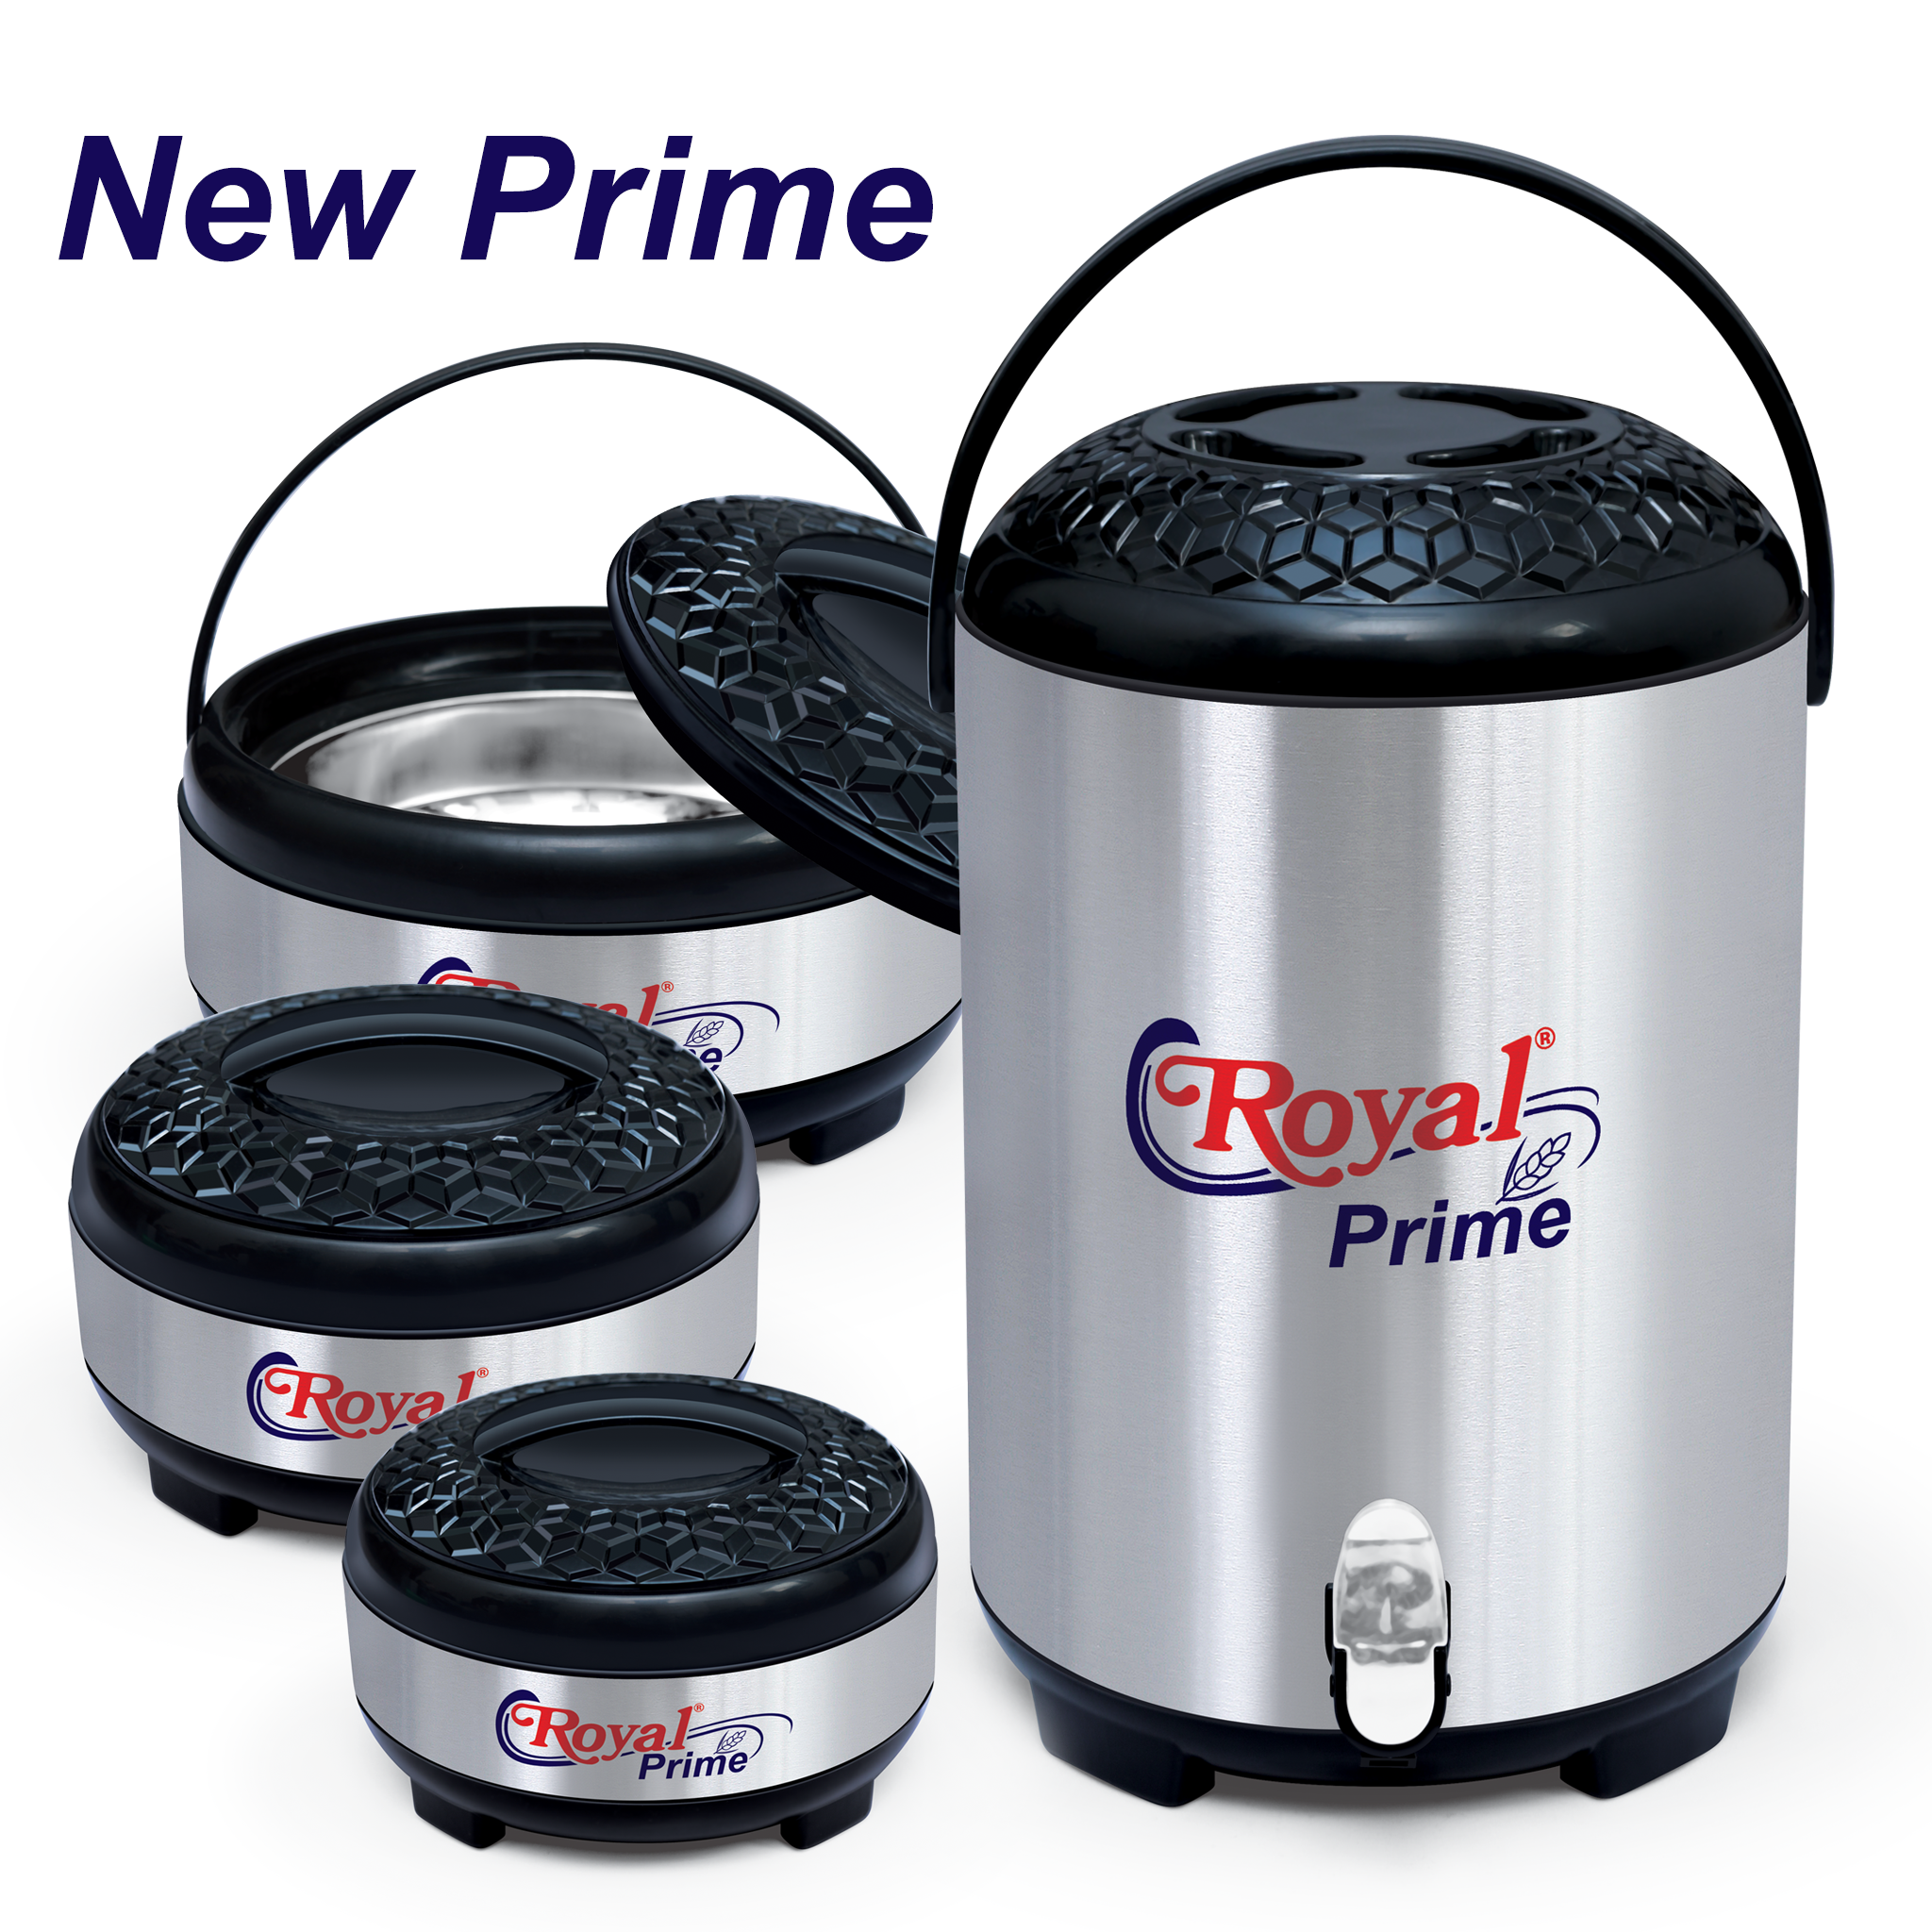 New Prime (Vol. 2) 4 Piece Gift Pack